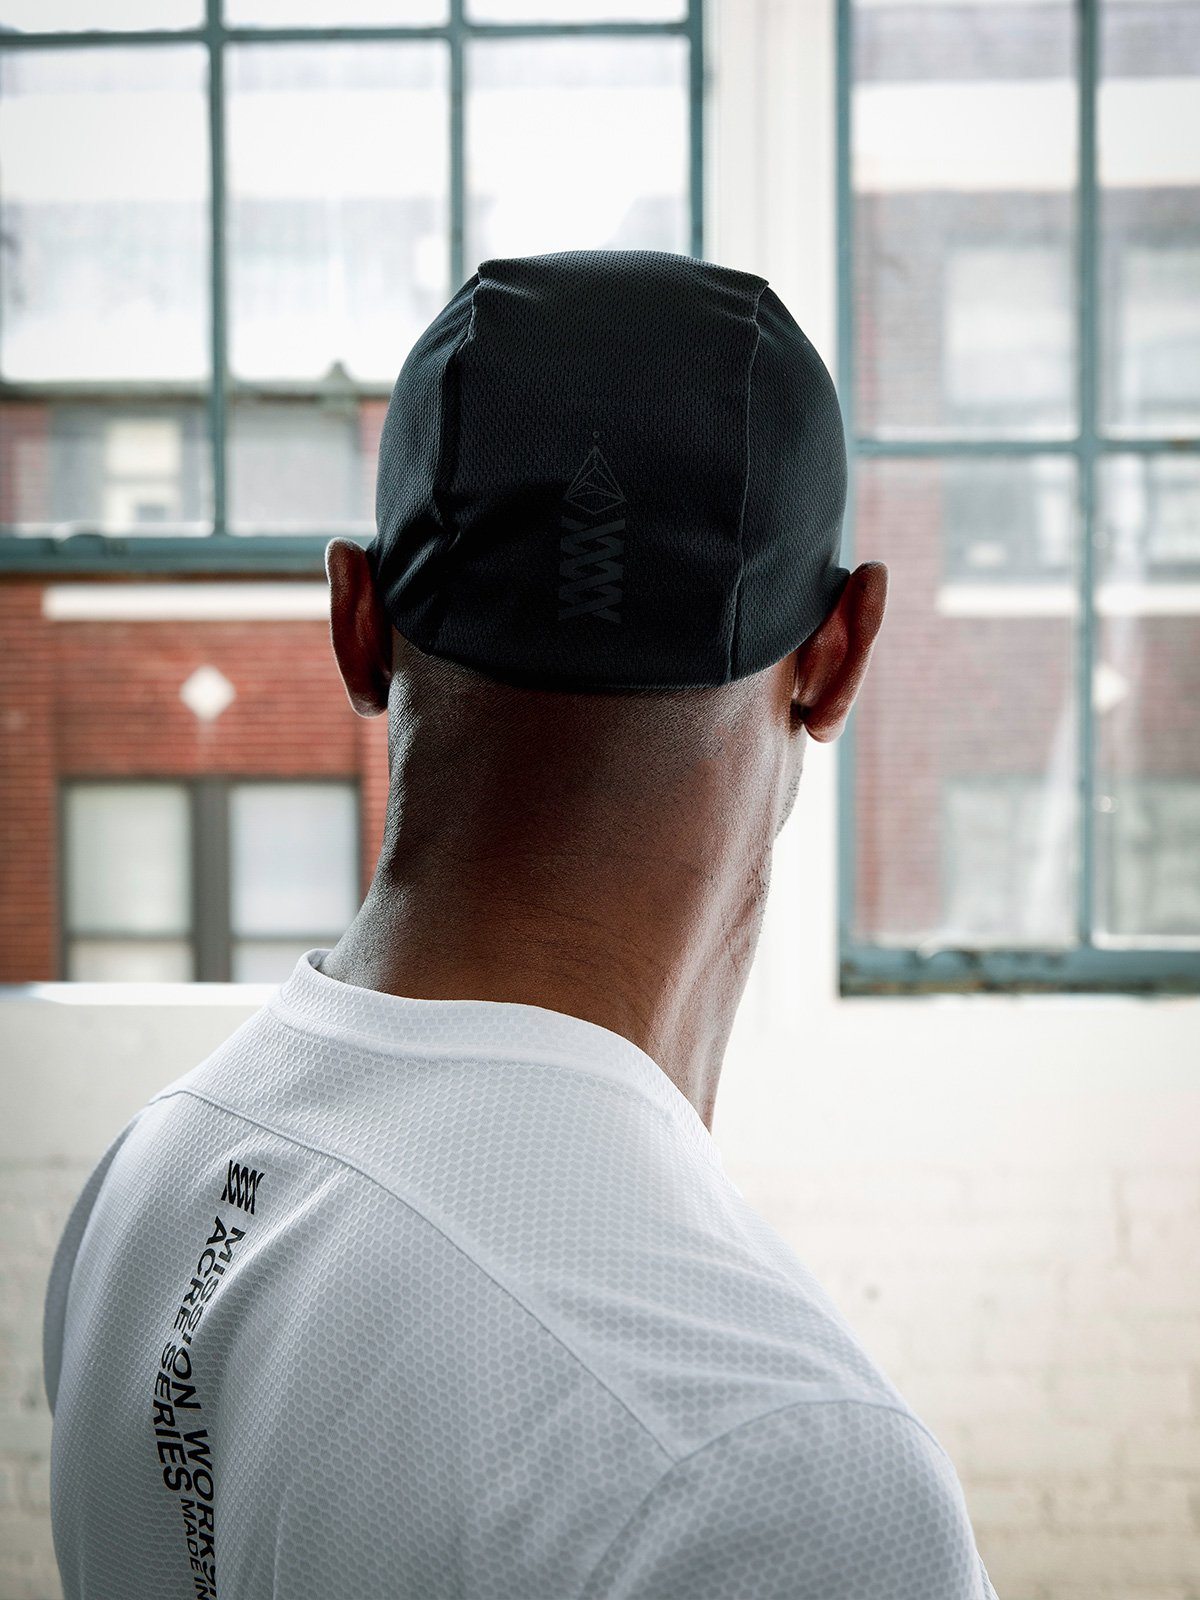 Mission Pro Cycling Cap by Mission Workshop - Weatherproof Bags & Technical Apparel - San Francisco & Los Angeles - Built to endure - Guaranteed forever